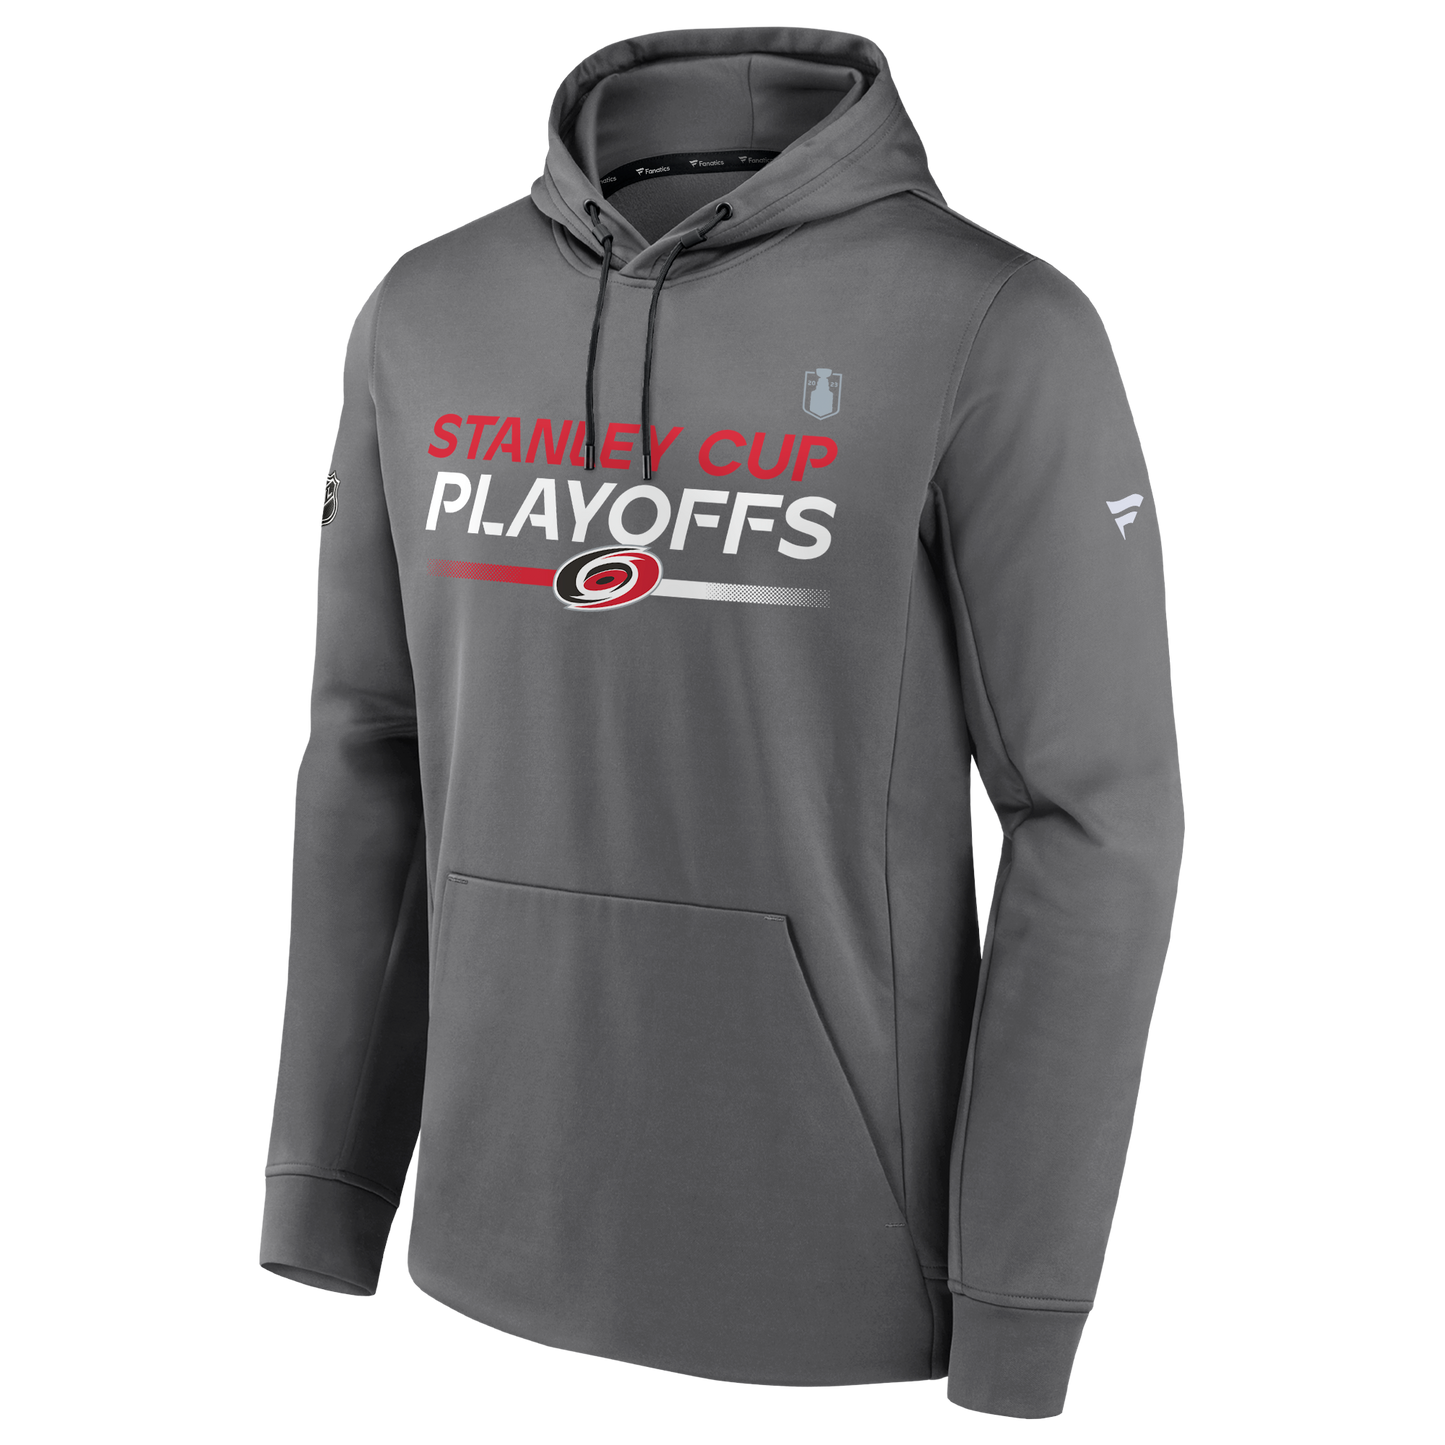 Gray hoodie that says Stanley Cup Playoffs with the Hurricanes logo on front